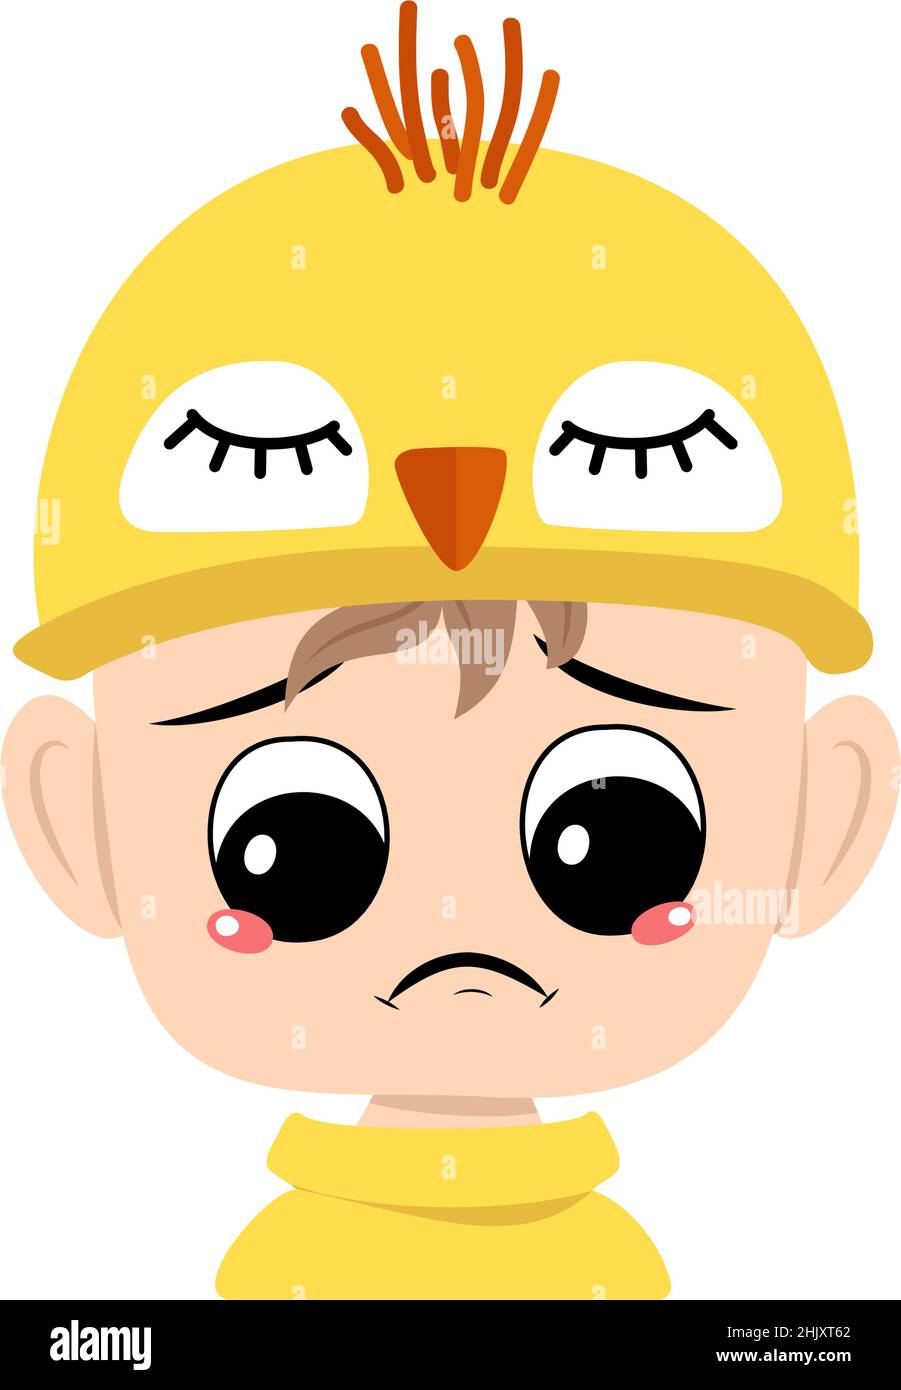 Avatar of boy with big eyes and sad emotions, depressed face, down eyes in yellow chicken hat. Child with melancholy expression for Easter, New Year or costume for party. Vector flat illustration Stock Vector